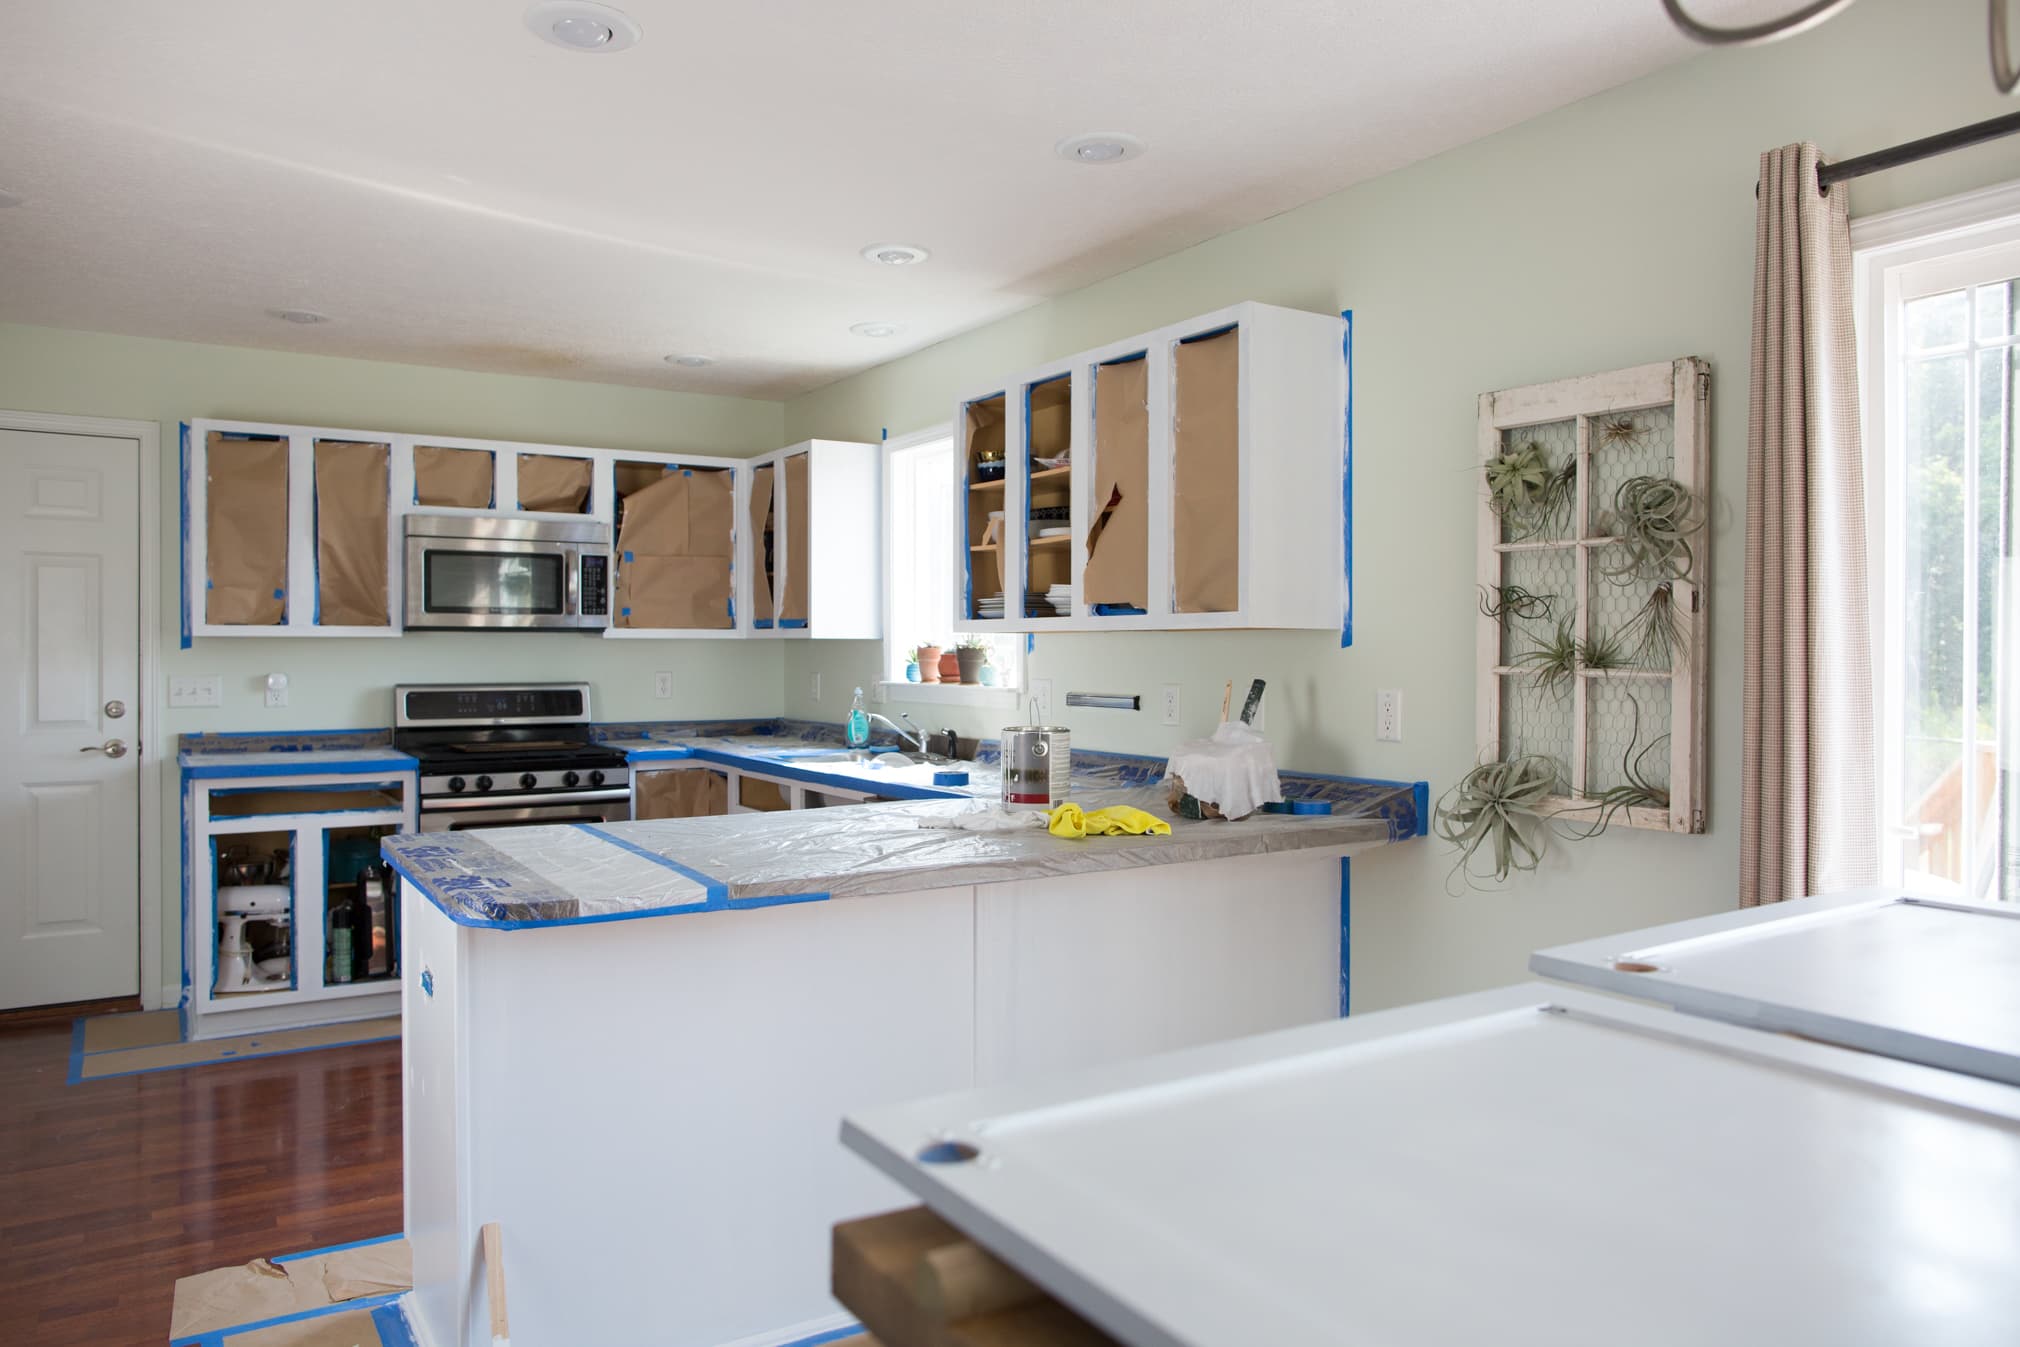 How Much Will It Cost To Paint Kitchen Cabinets Kitchn